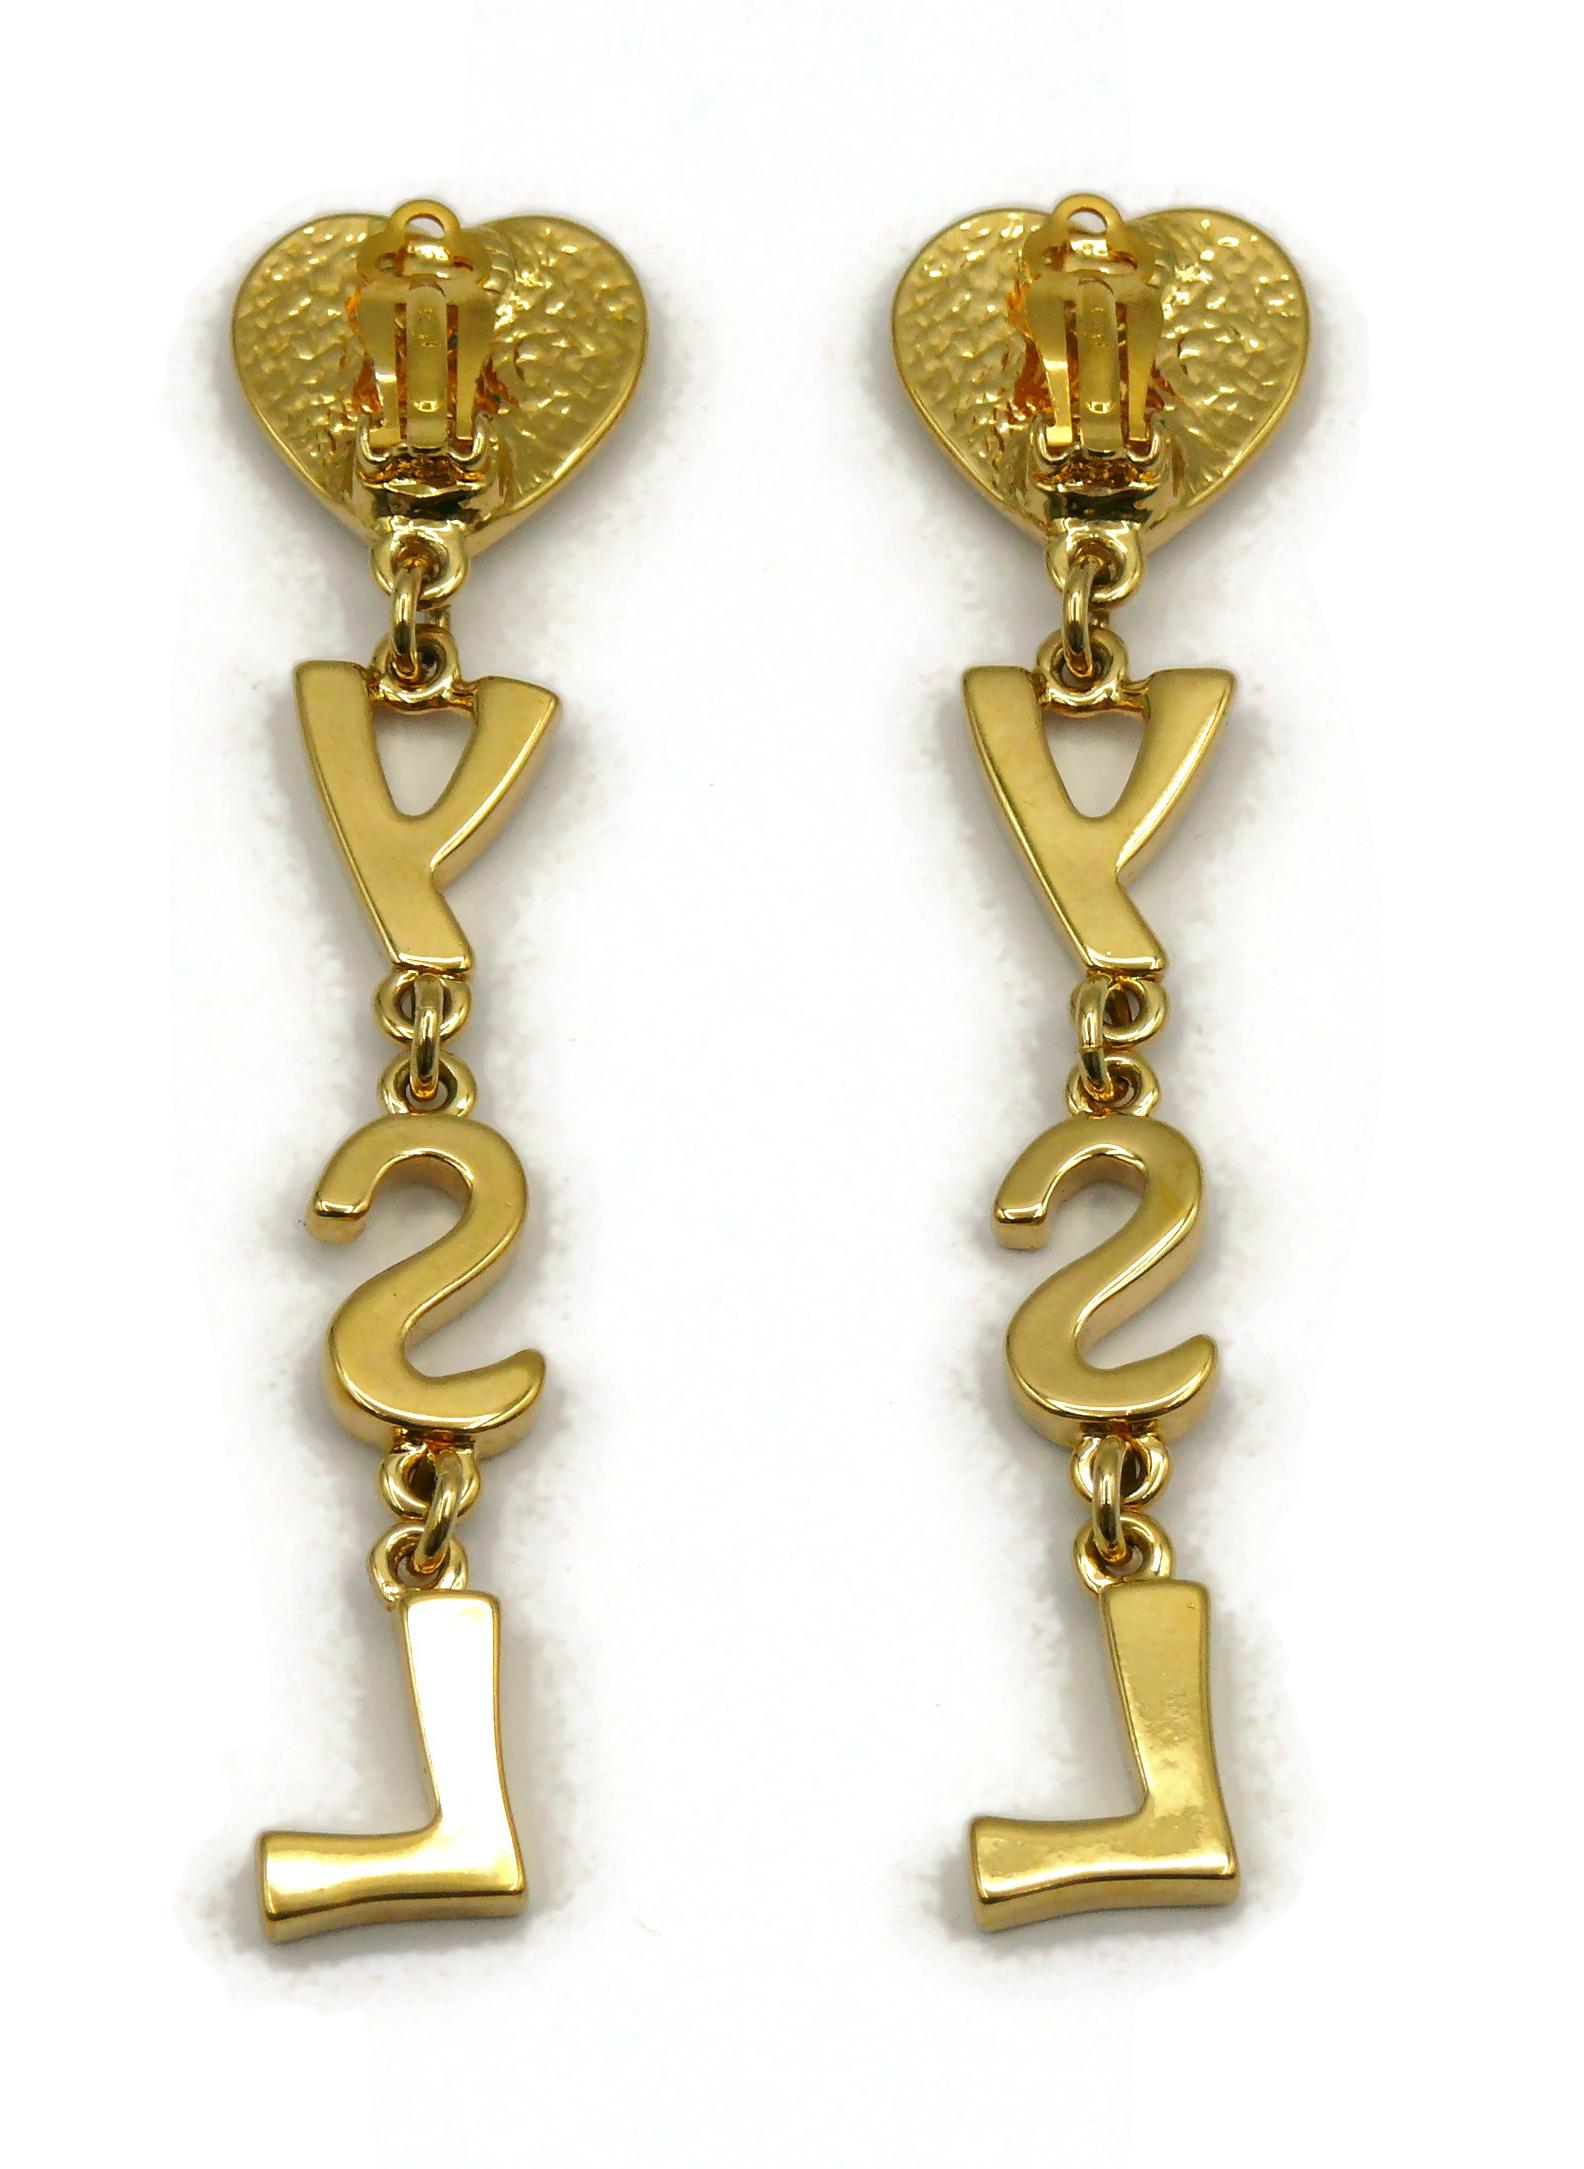 YVES SAINT LAURENT YSL Vintage Initials Dangling Earrings In Good Condition For Sale In Nice, FR